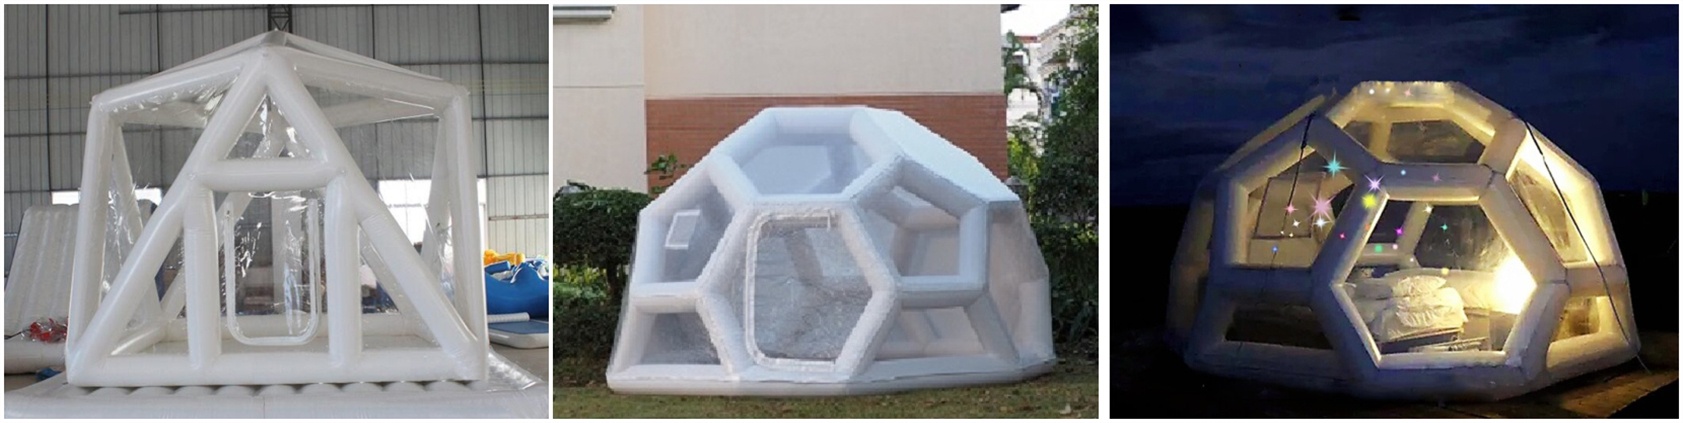 inflatable dome bubble starry night tent